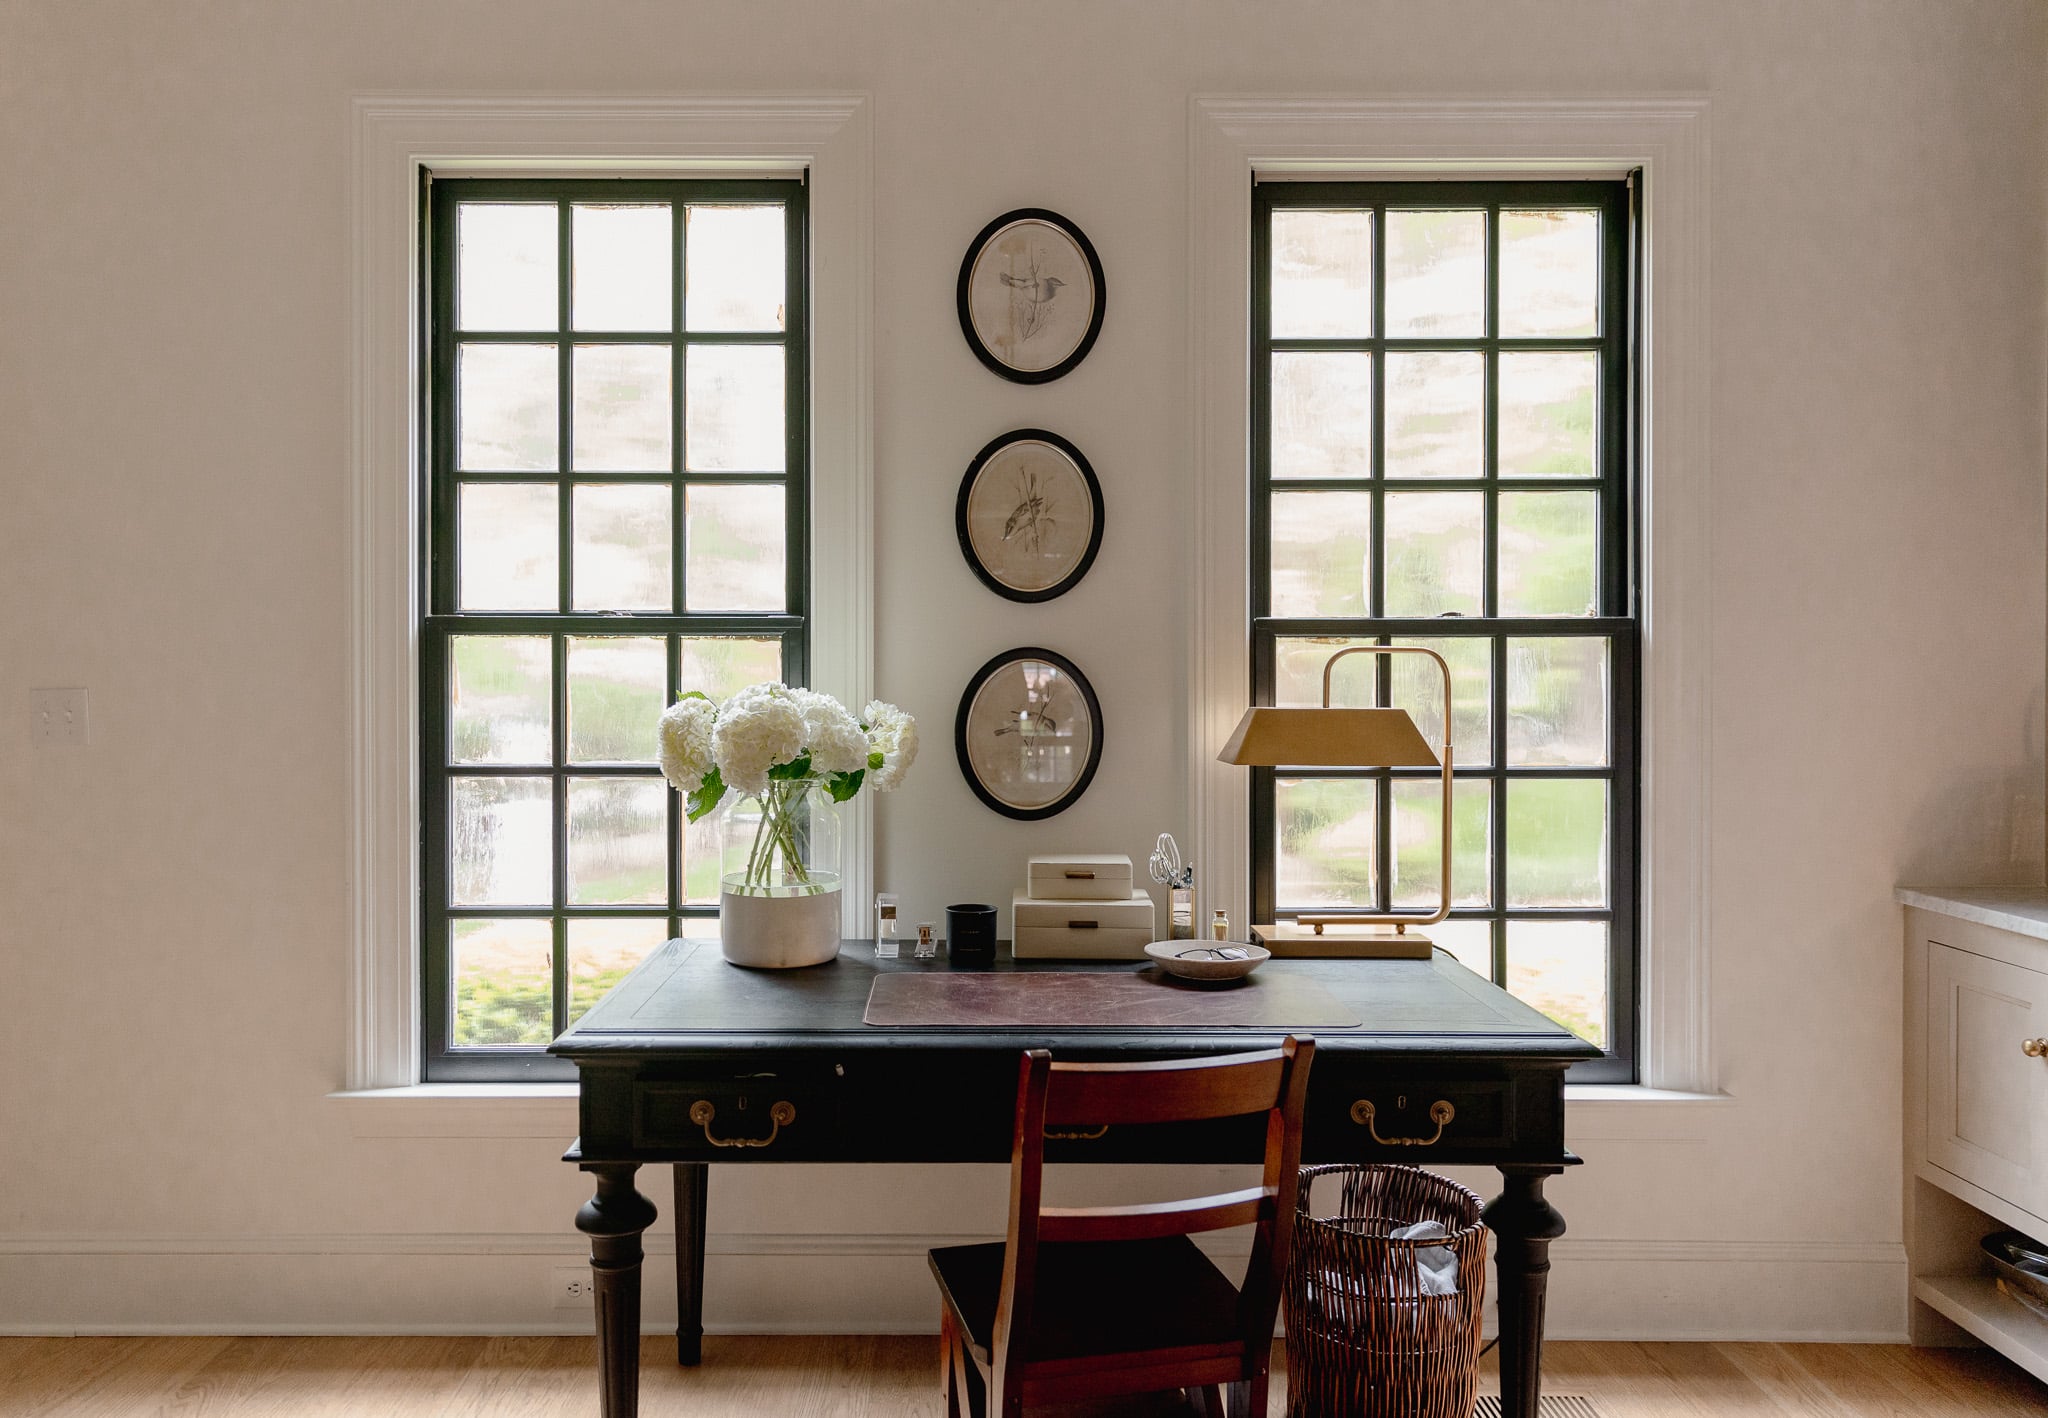 Chris Loves Julia | View of the kitchen desk of new windows with black interior trim